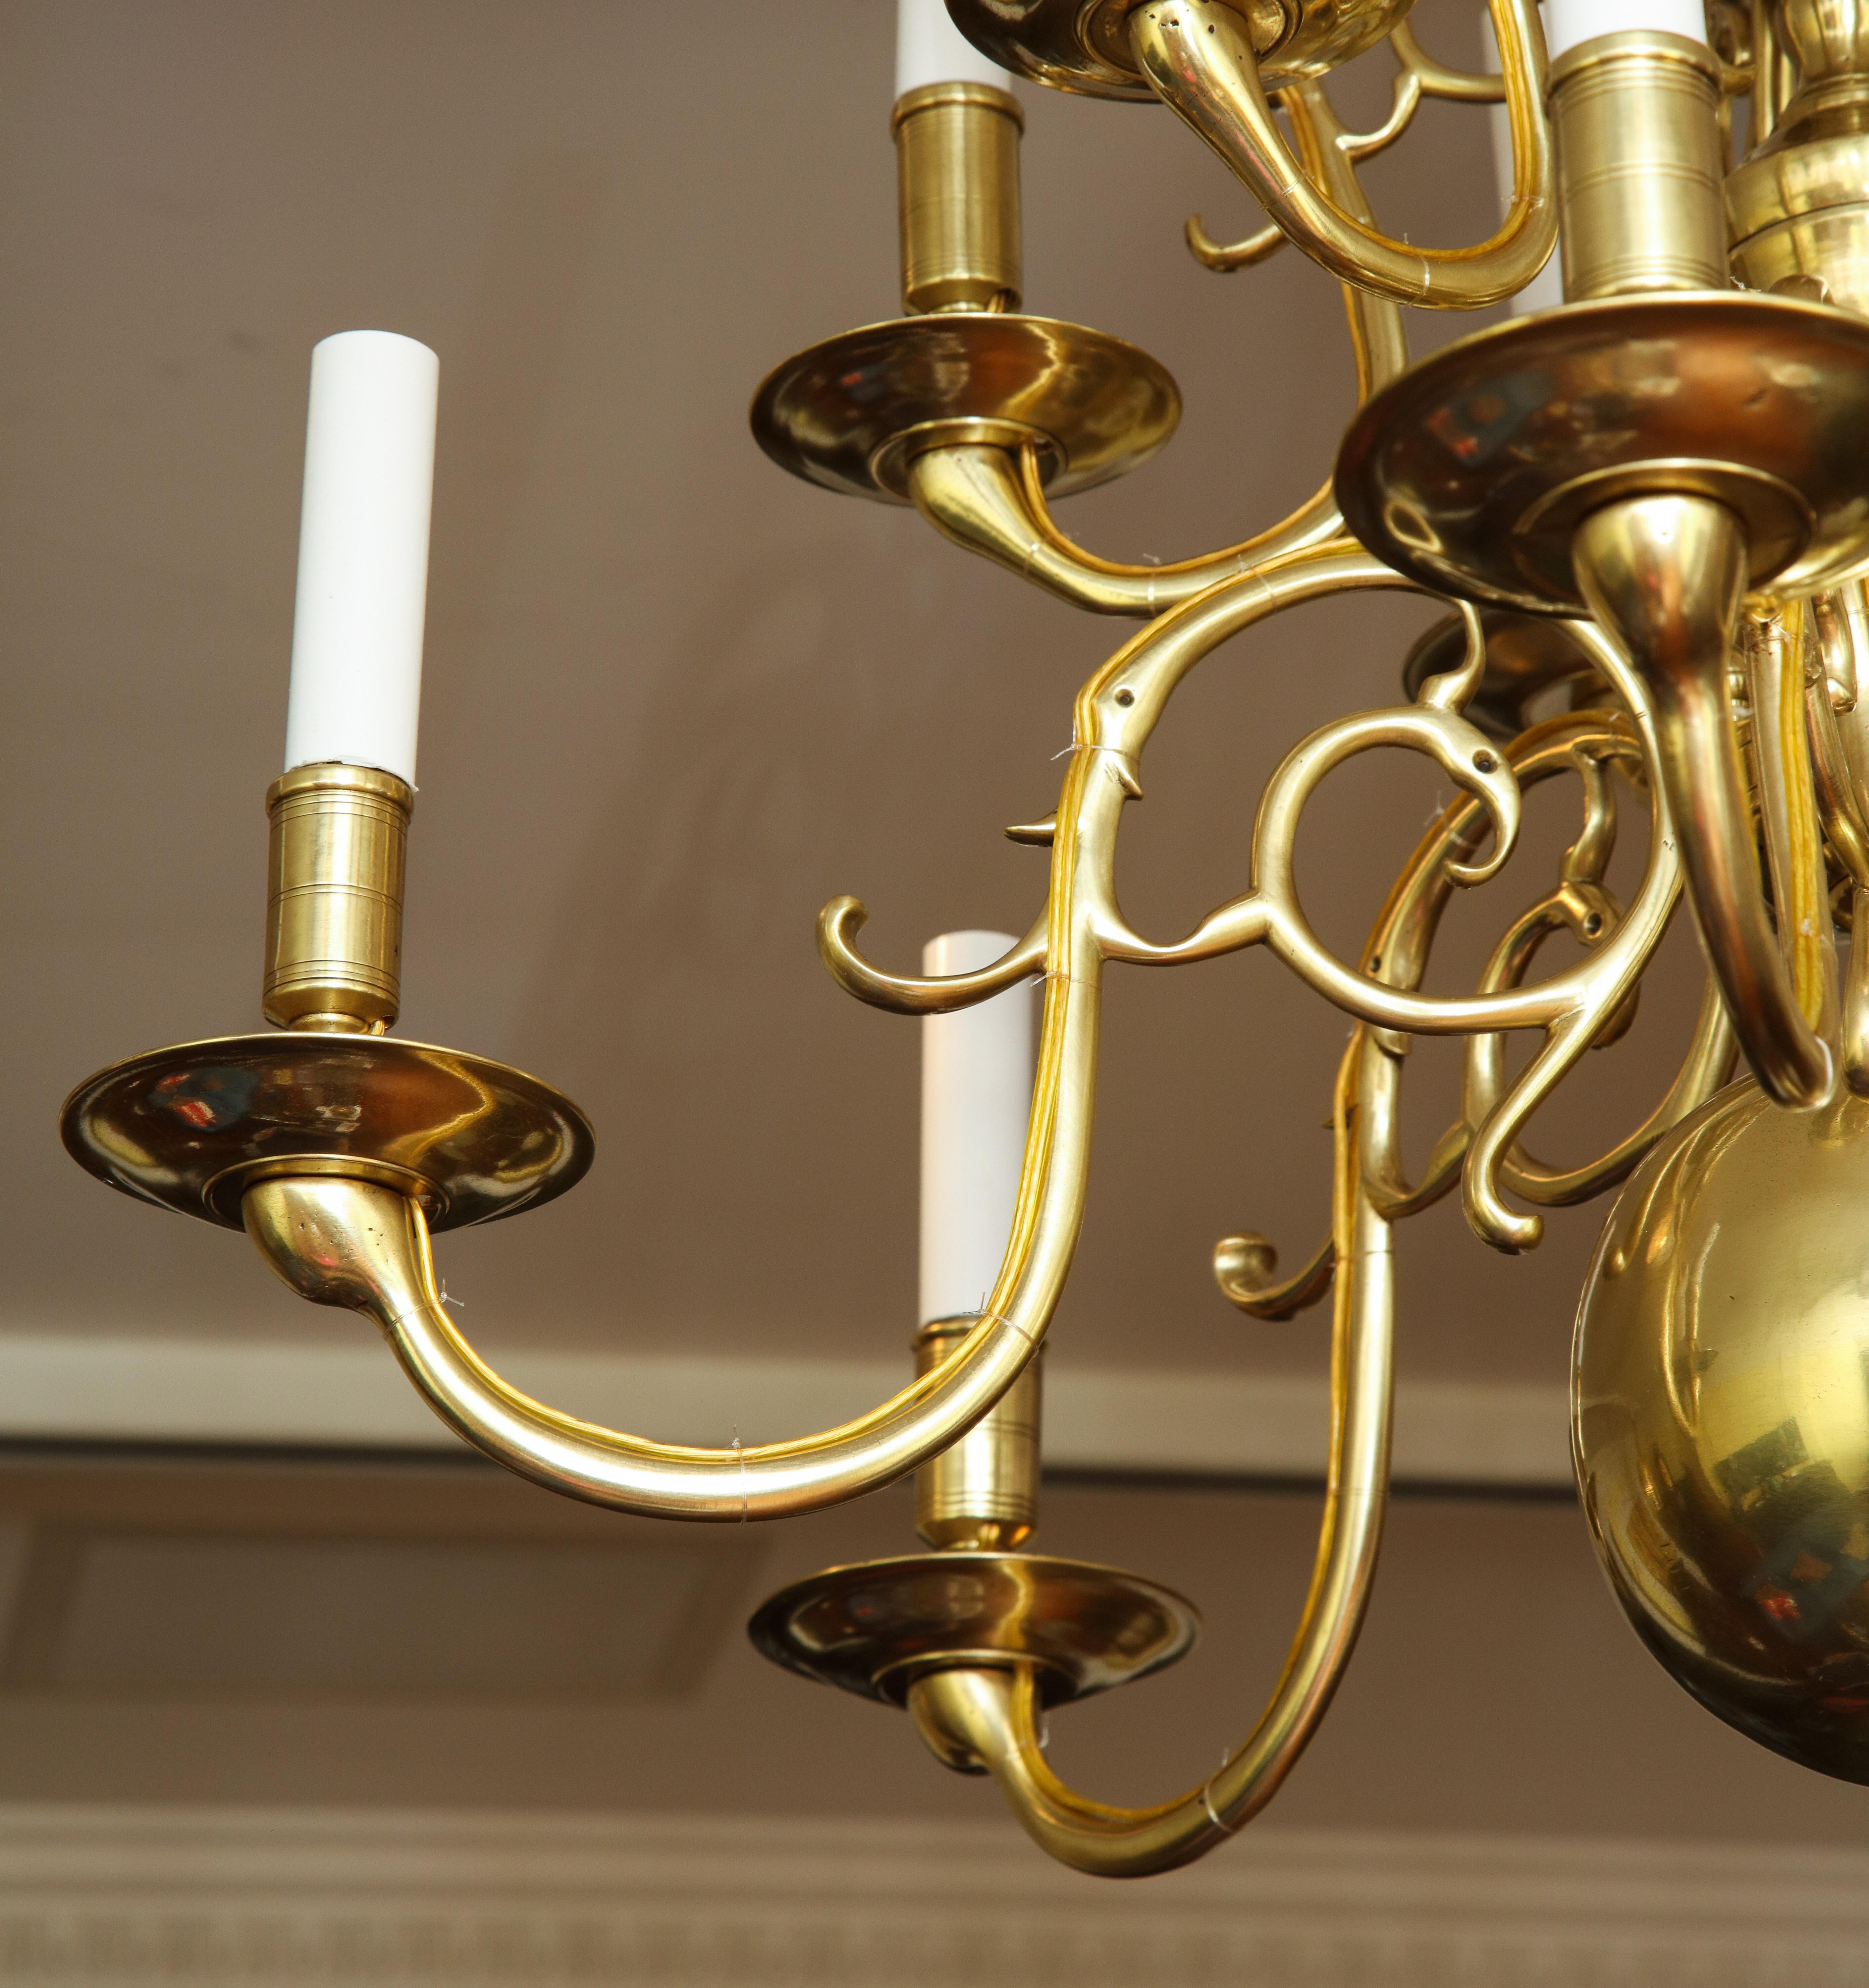 Baltic Antique Brass 12-Light Scrolled Arm Chandelier with Large Lower Ball, circa 1850 For Sale